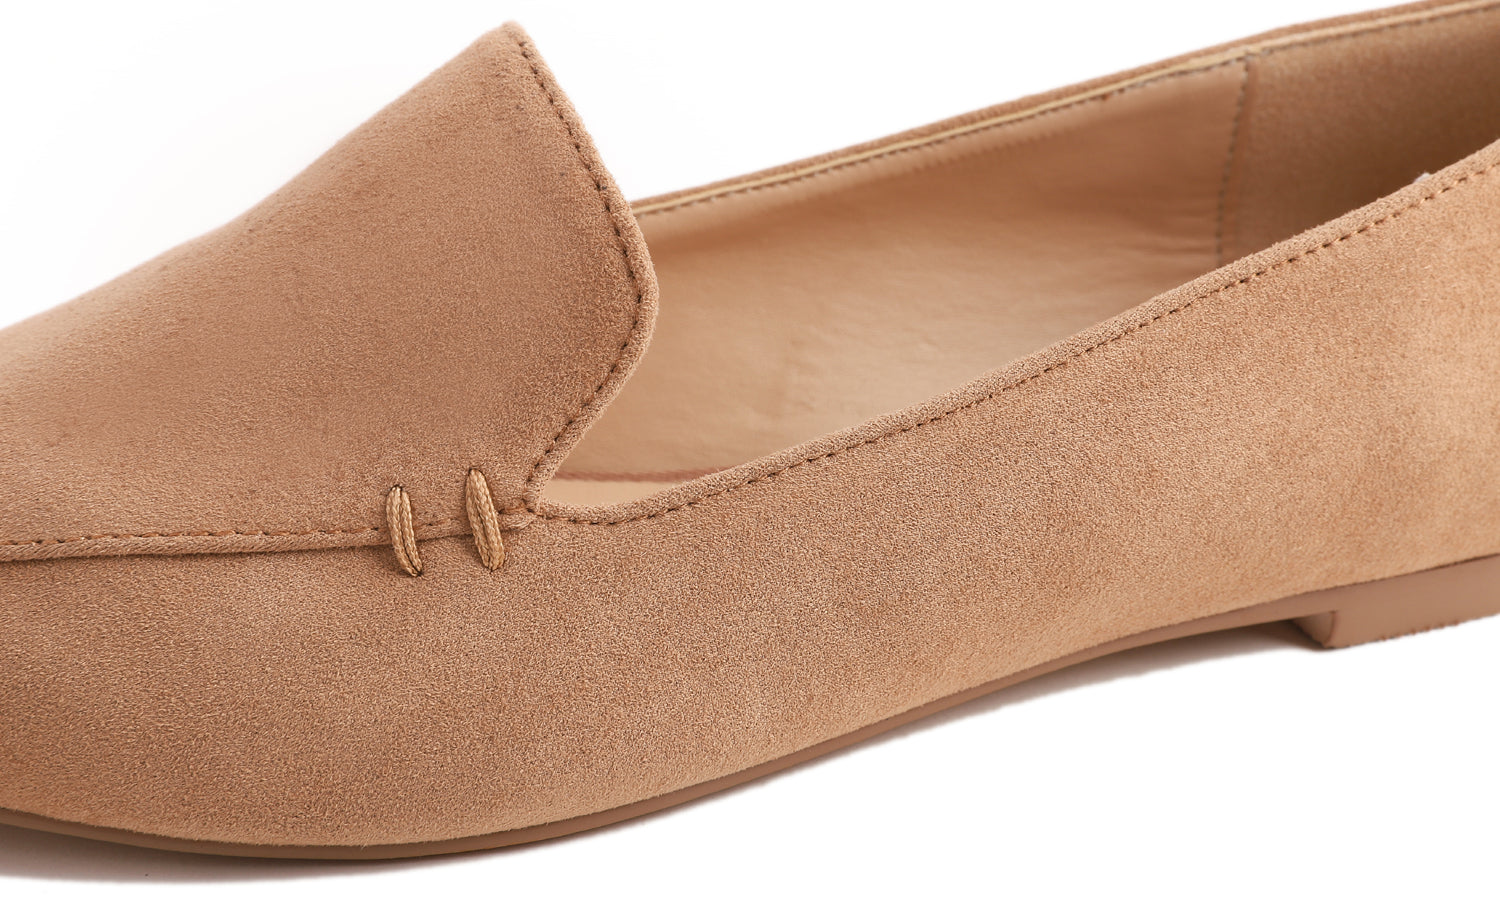 Feversole Women's Loafer Flat Pointed Fashion Slip On Comfort Driving Office Shoes Light Camel Faux Suede